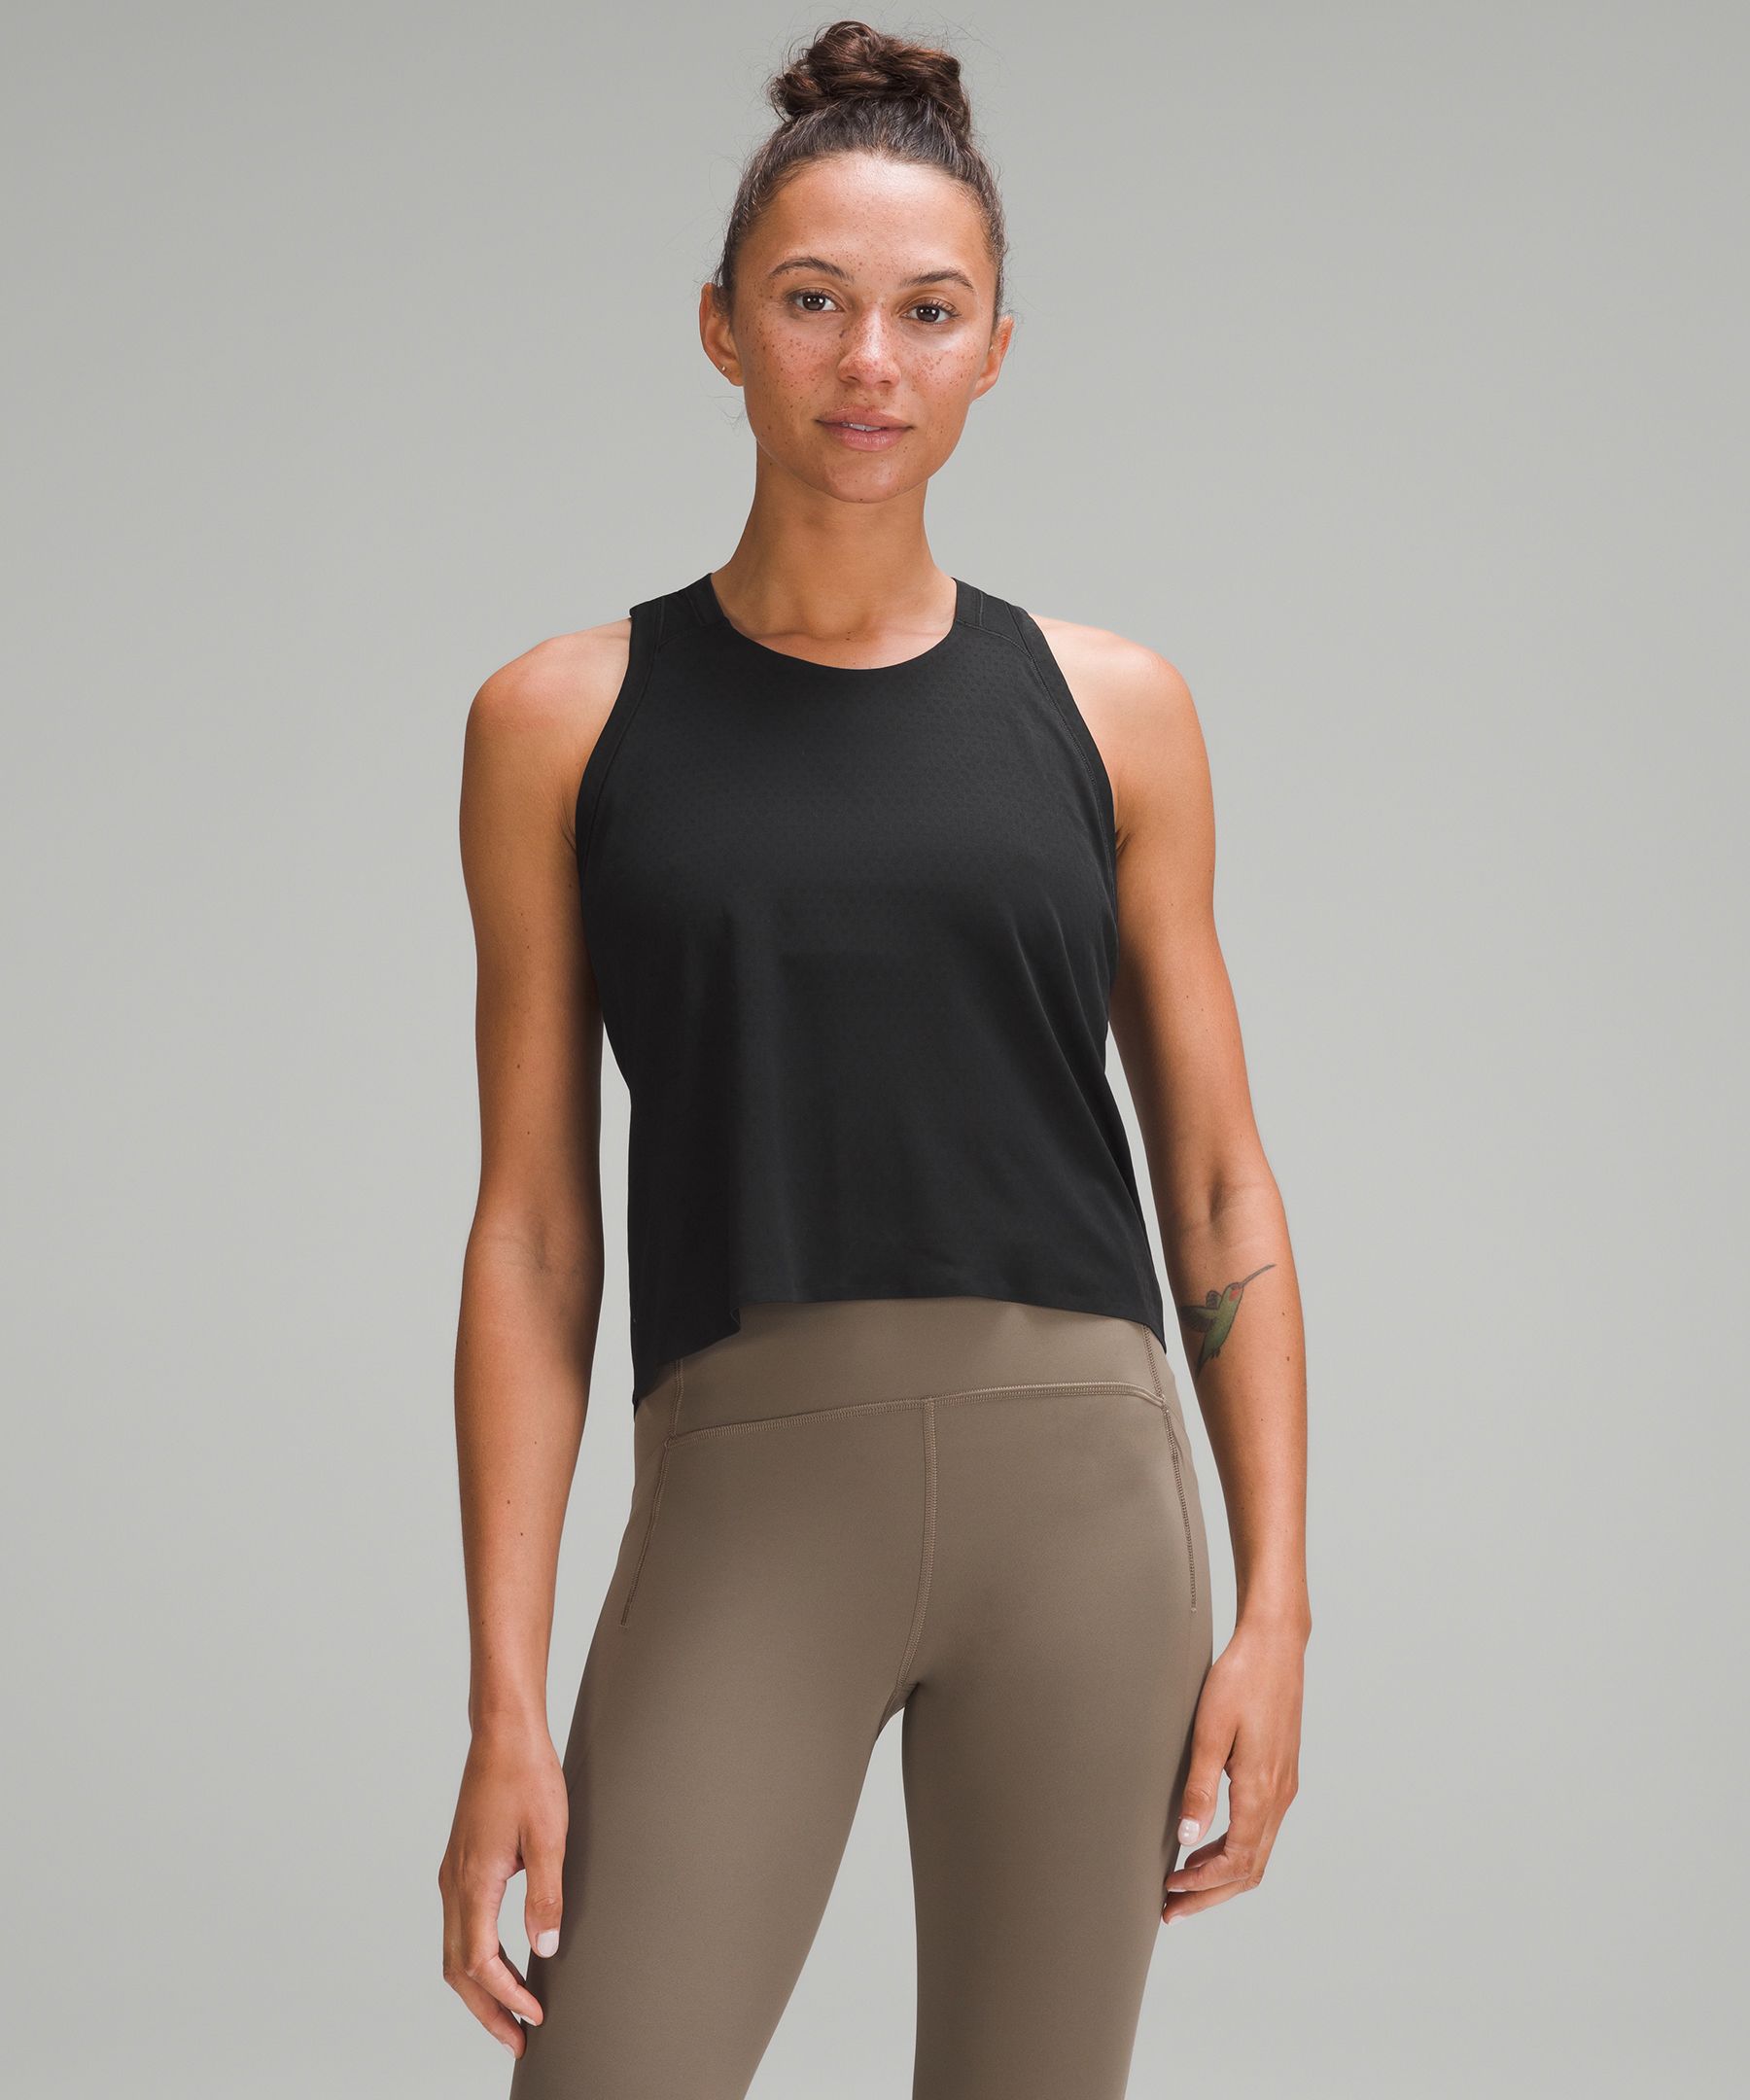 Lululemon's Hyper-Limited Race Collection Is Available Online This